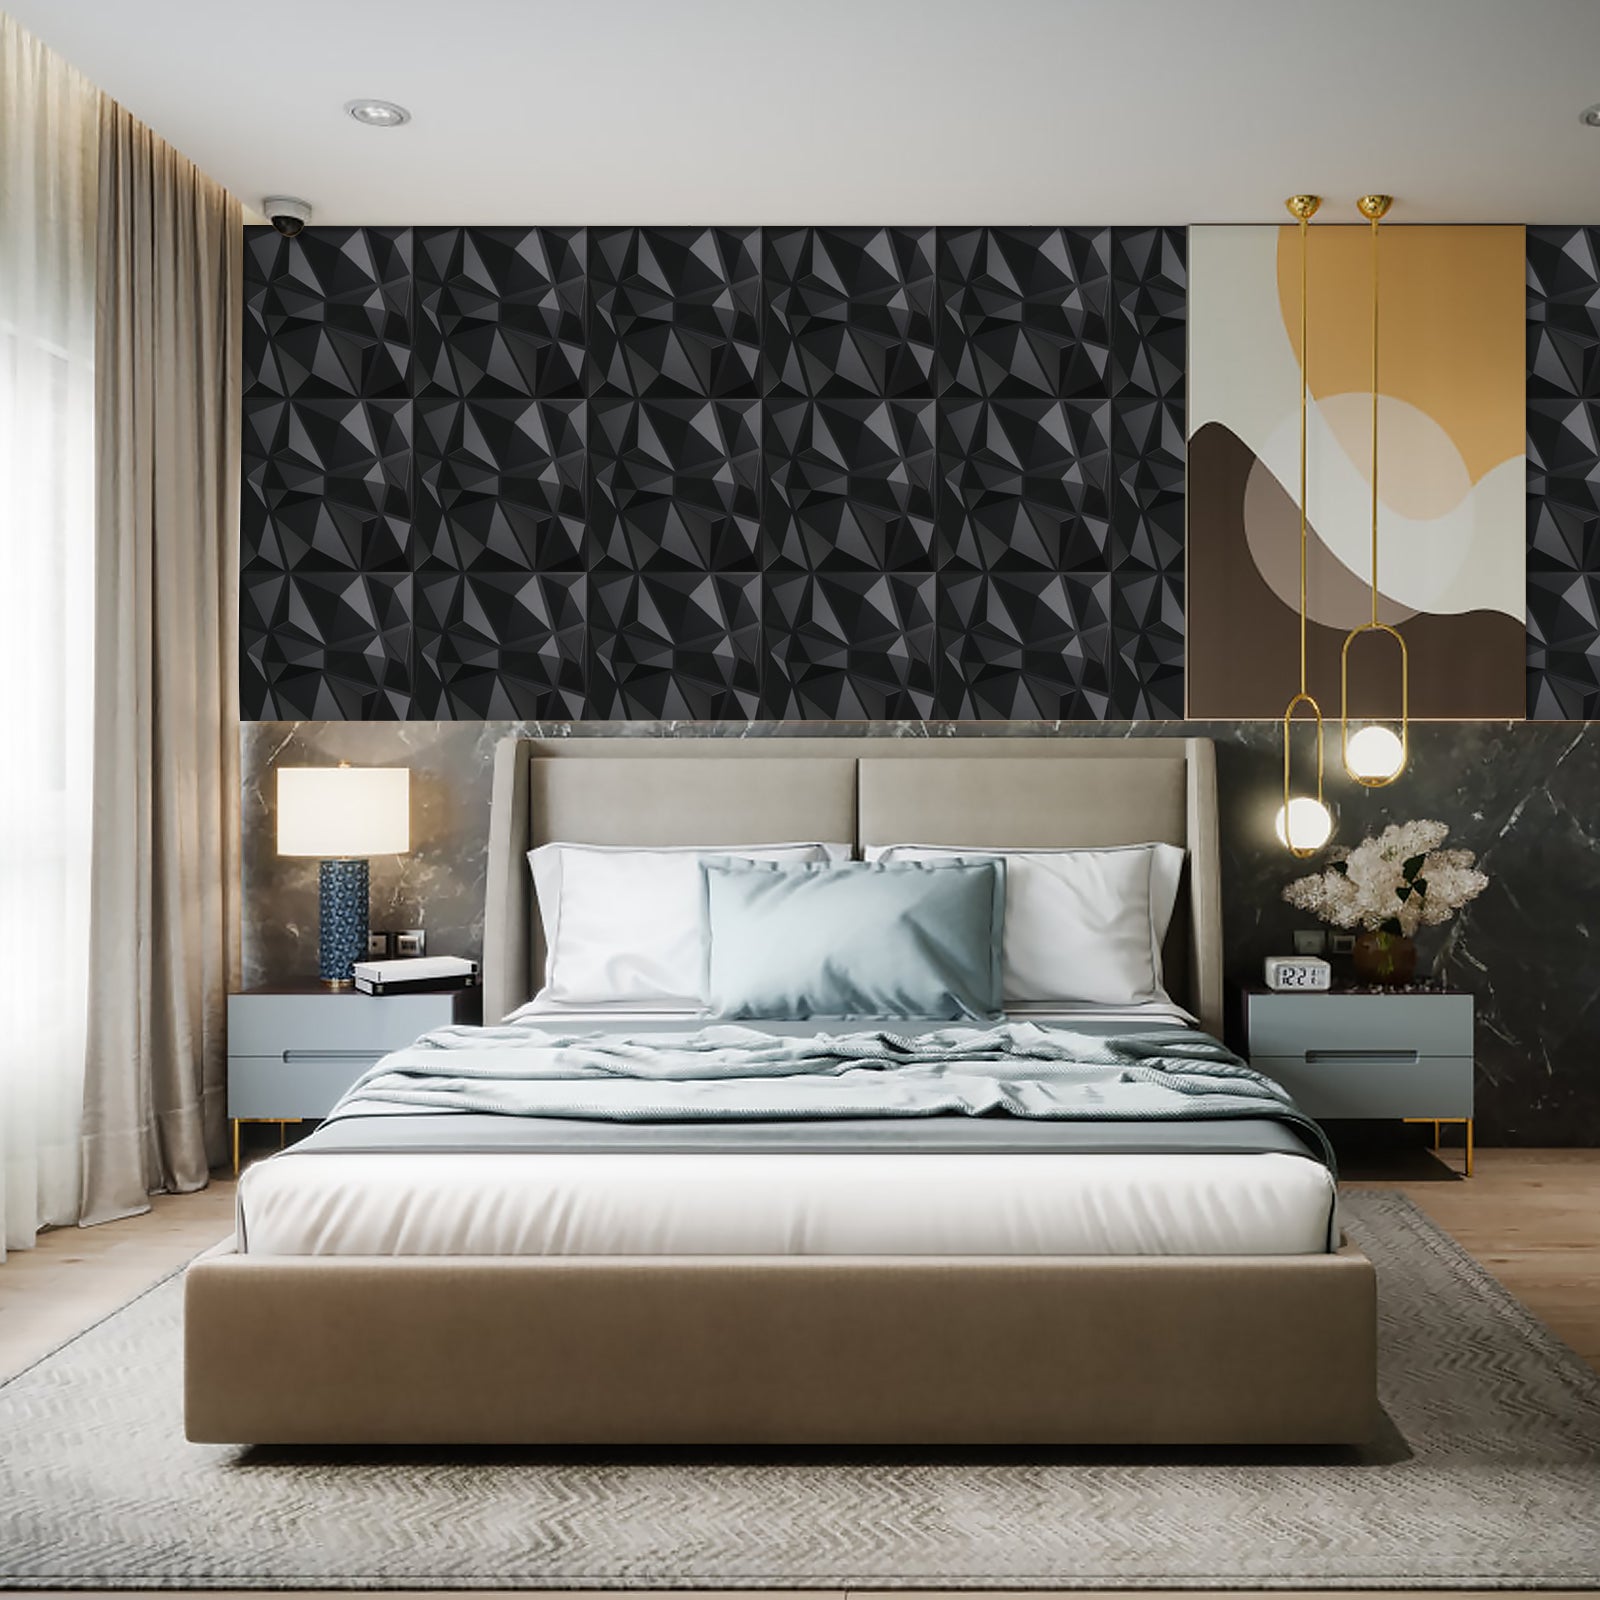 peel and stick wall panels for bedroom